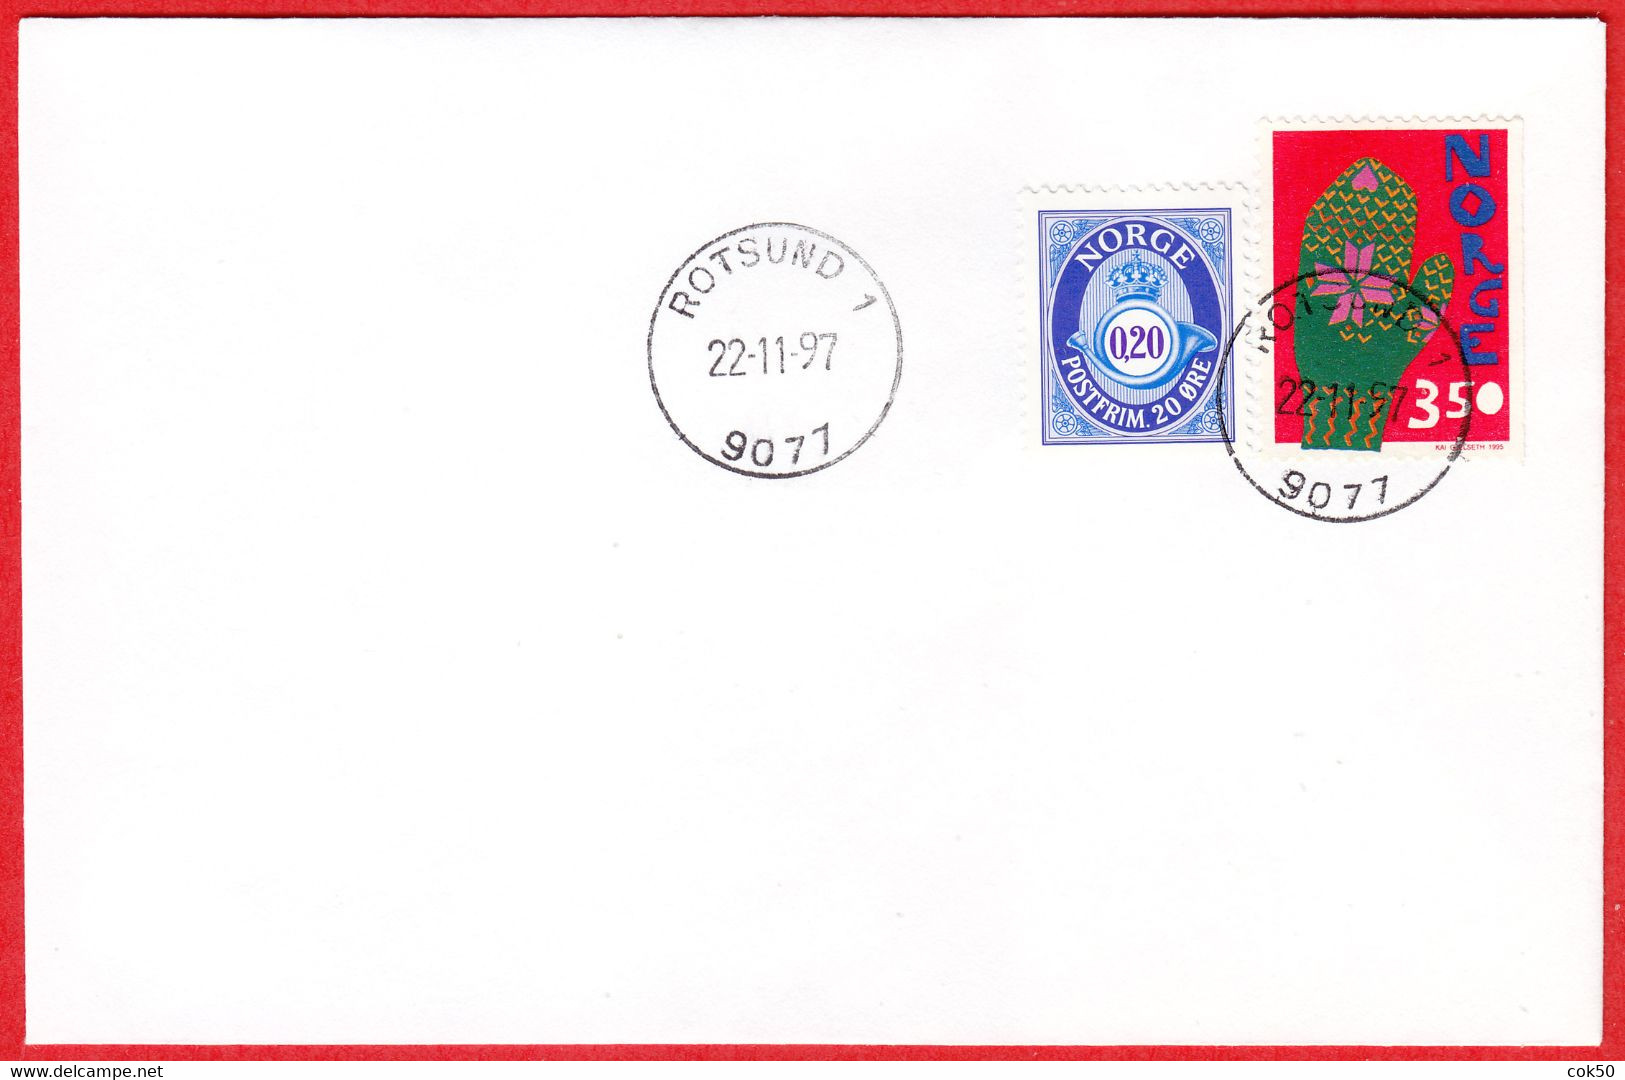 NORWAY -  9077 ROTSUND 1 (Troms County) - Last Day/postoffice Closed On 1997.11.22 - Lokale Uitgaven